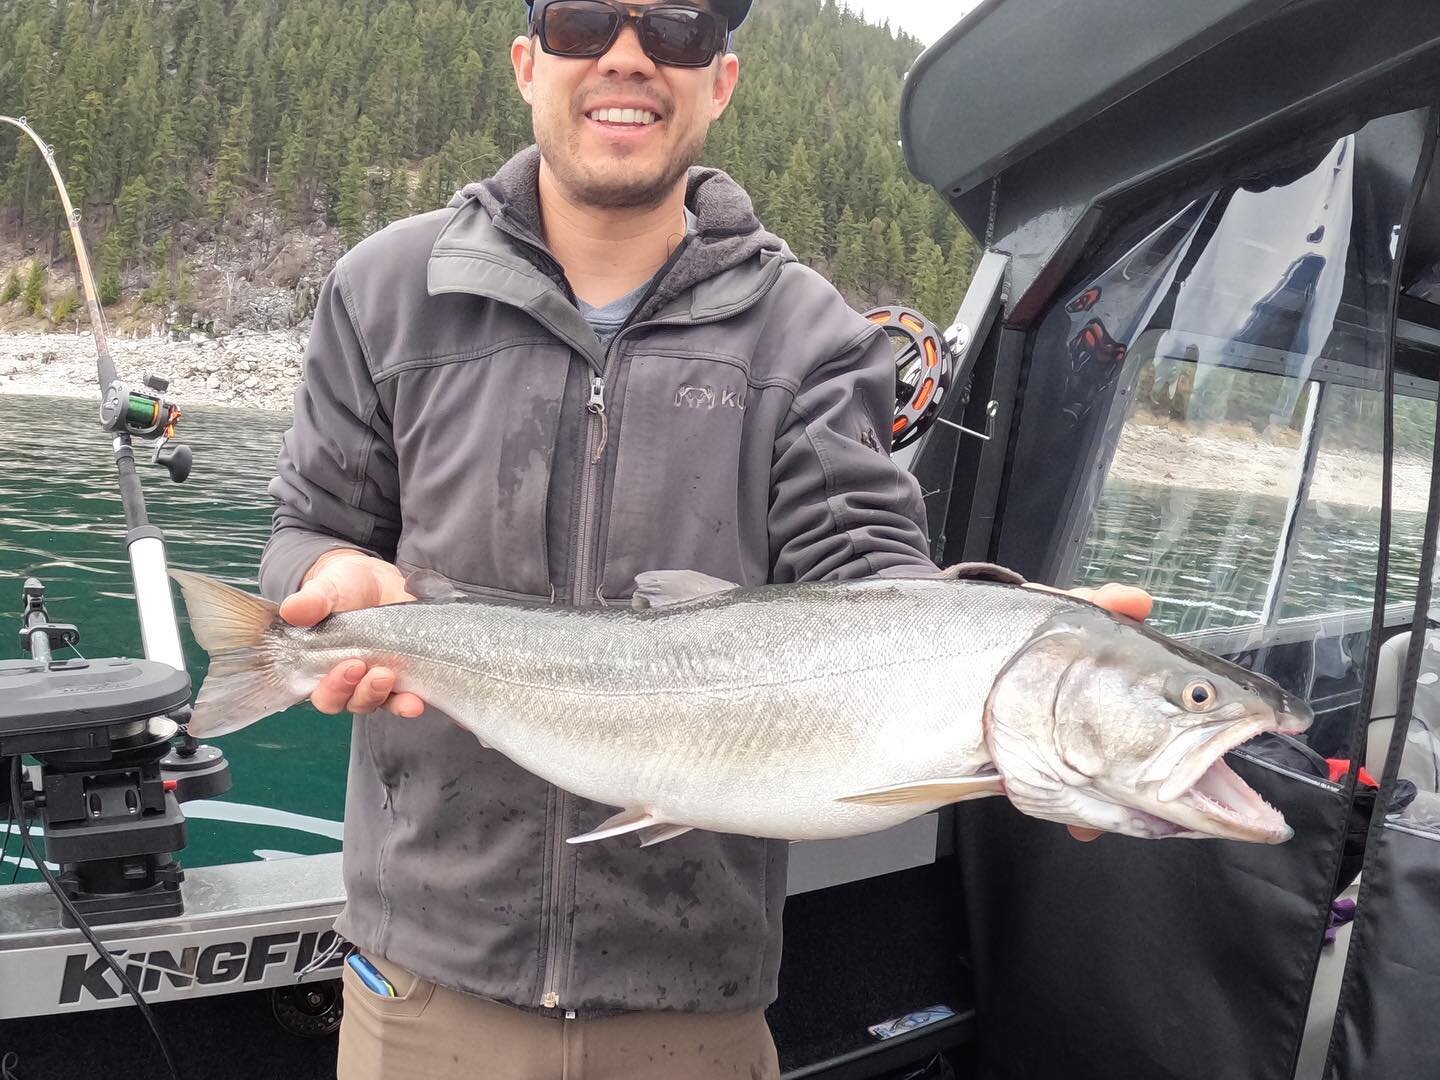 Fun few hours on the water today, my buddy showed us how it&rsquo;s done with all the hook ups. #sundayfunday #uglystick #seerevelstoke #kootrocks #bulltrout #lakefishing #trollinglures #fishing #bulltroutfishing #bcfishing #fishbc #okumafishing #get